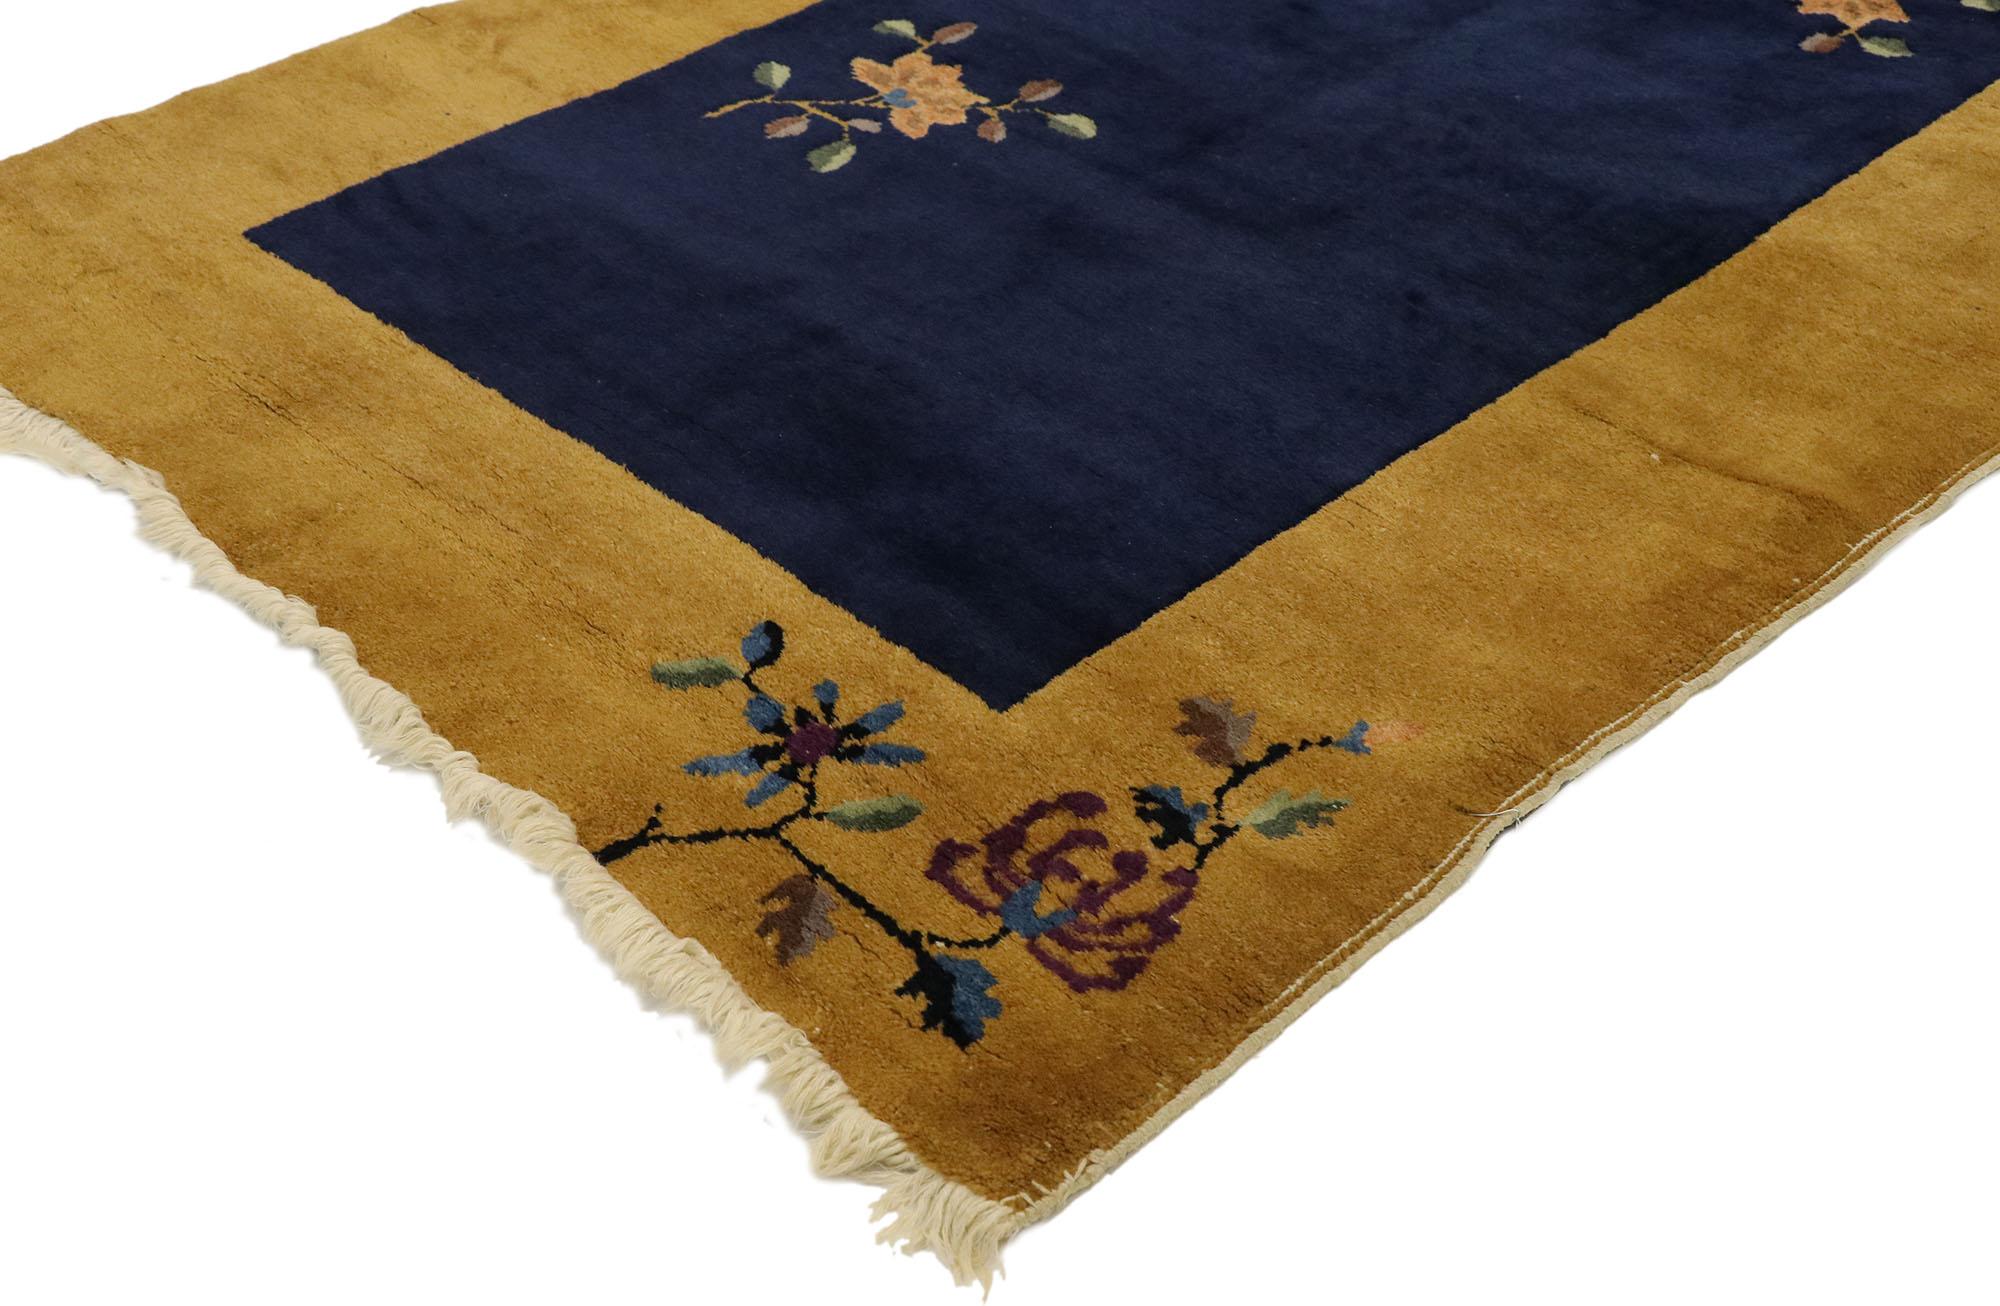 77447 antique Chinese Art Deco rug with Minimalist Qing Dynasty style. This hand knotted wool antique Chinese Art Deco rug features a color-blocked field and border scheme festooned with a Minimalist Qing Dynasty style. The open abrashed midnight